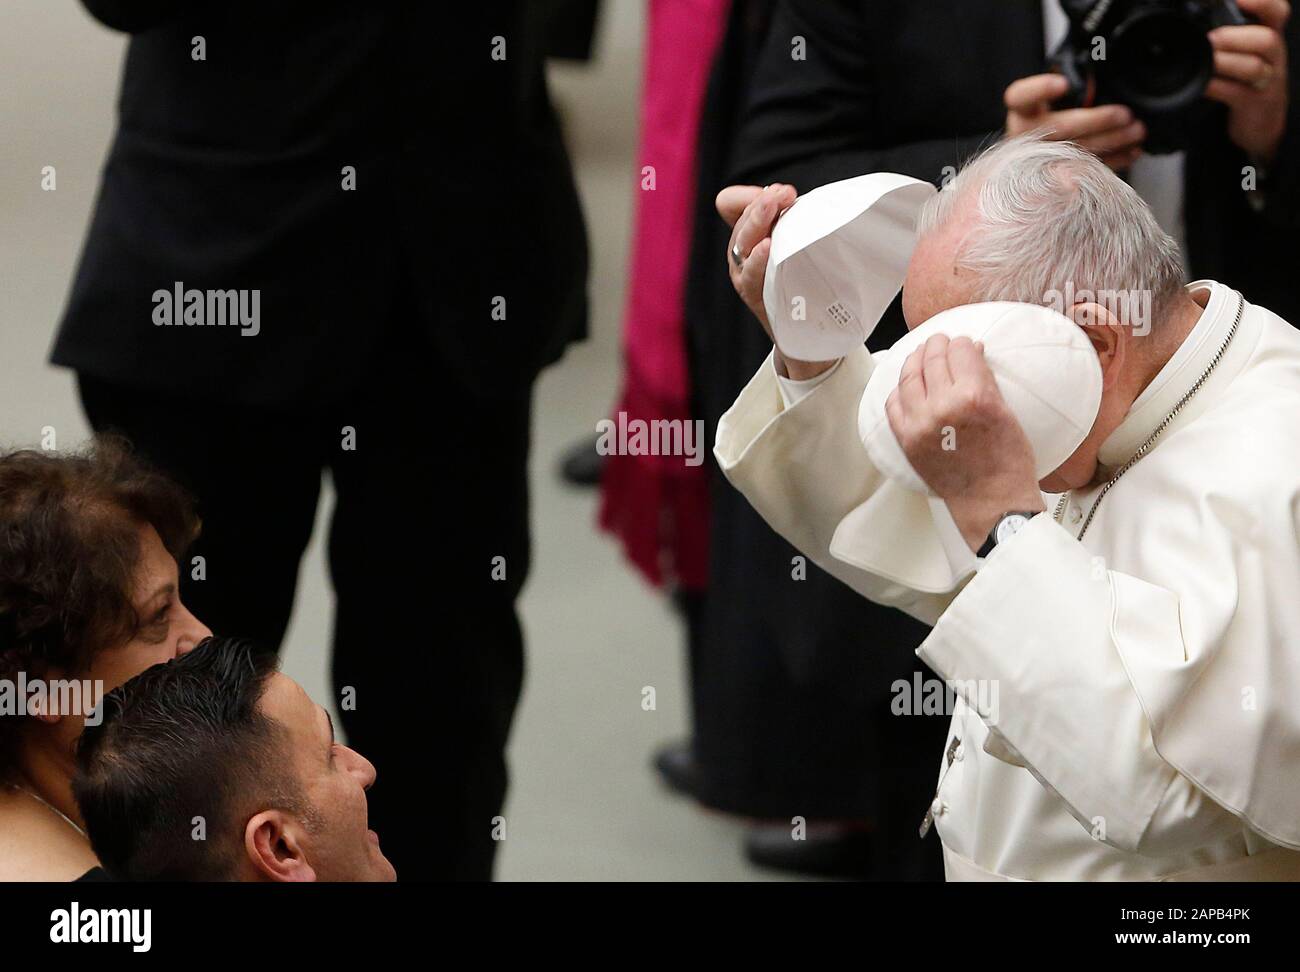 Vatican City, Vatican. 22nd Jan, 2020. Vatican, Vatican City, January 22, 2020. Pope Francis exchanges his skull cap with one donated by faithful at the end of his weekly general audience in the Paul VI hall. Credit: Update Images/Alamy Live News Stock Photo